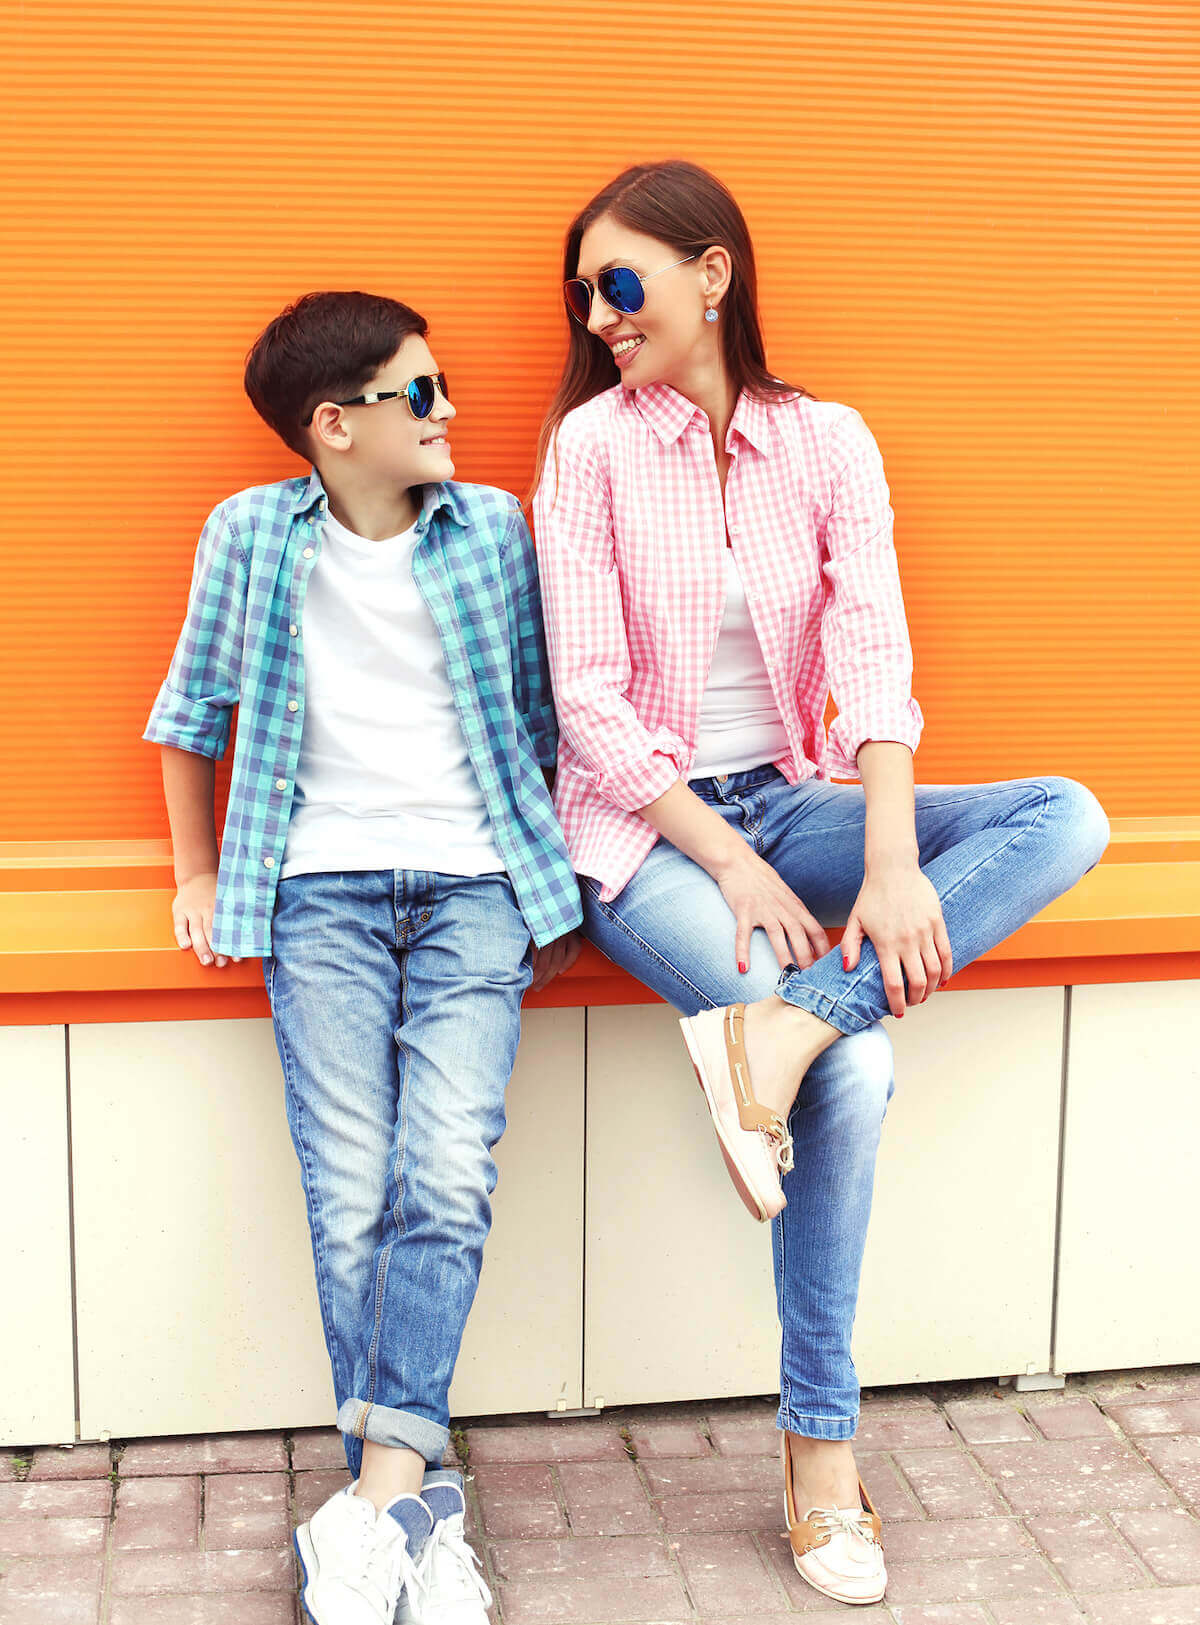 mother and son with sunglasses on sitting on a bench in front of a bright orange wall